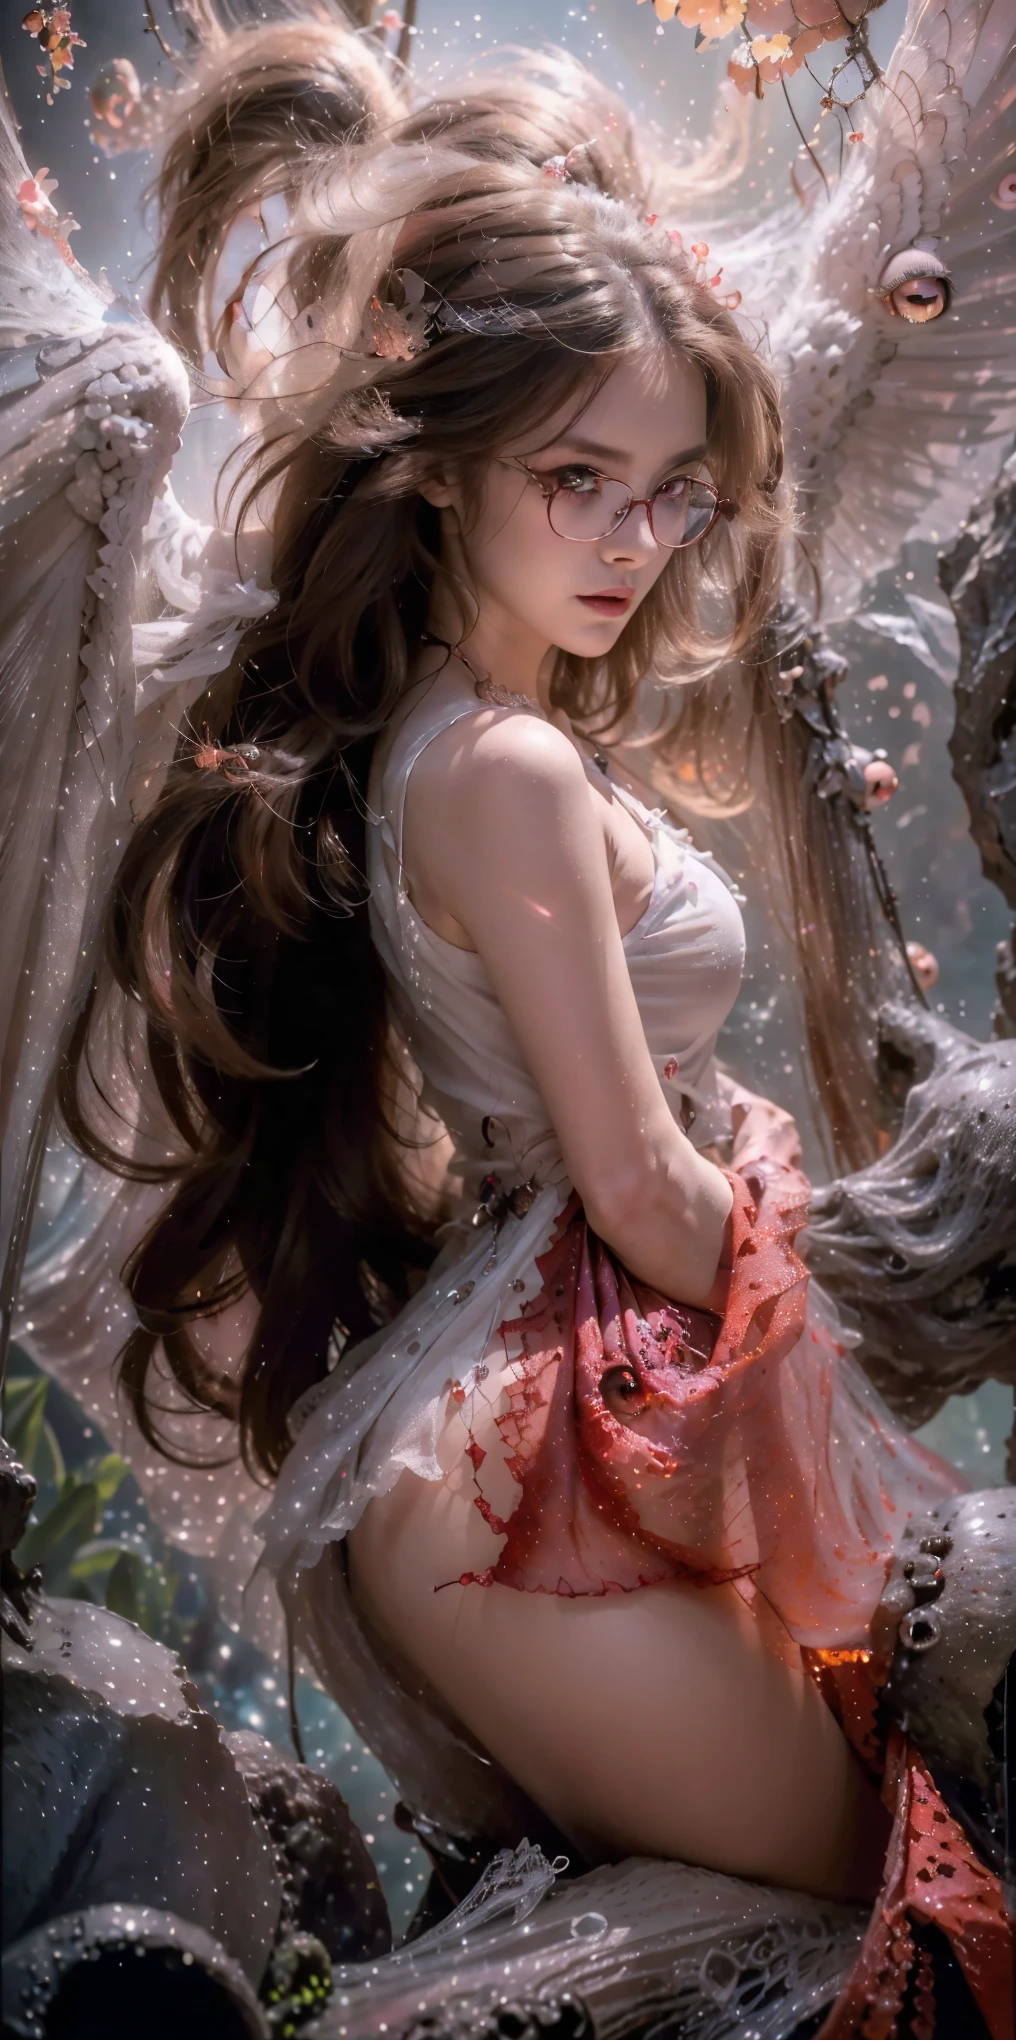 (The best illustrations)、realisitic、ultra-detailliert、The best lighting、Best Shadows、alluring succubus, ethereal beauty, perched on a cloud, (fantasy illustration:1.3), enchanting gaze, captivating pose, delicate wings, otherworldly charm, mystical sky, (Luis Royo:1.2), (Yoshitaka Amano:1.1), Dungeon and Dragon、caves、Dungeon、 A Necromancer、natta、Dark style、Succubus、Devil's Daughter、Bat Wings，(((Demon Hornlack-rimmed round glasses))))、(red eyes glowing:1.6)、​beautiful countenance、Tindall Effect、(High Detail Skins:1.2) absurderes、Ponytail distortion、jewely、Beautiful expression、Toned waist、Wide buttocks、Tindall Effectmasuter piece、top-quality、Highest Standards、Top image quality、masutepiece、intricate detailes、High resolution、Depth Field、natural soft light、profetional lighting、Great smile、(High Detail Skin: 1.2)、photorealistic anime girl render、Strong highlights of the eyes、Perfect Anatomy、crotch open、Shy、Spreading your legs、Panties are visible、Skirt flipping、Body shiny with oilerectile nipple))、8K resolution、intricate clothing、Intricate details, Sexy girl on white bed，Charming eyes，Heartwarming action，Open legs，Transparent silk pajamas ，barechested，Thick long hair，Highly detailed body，Highly detailed face